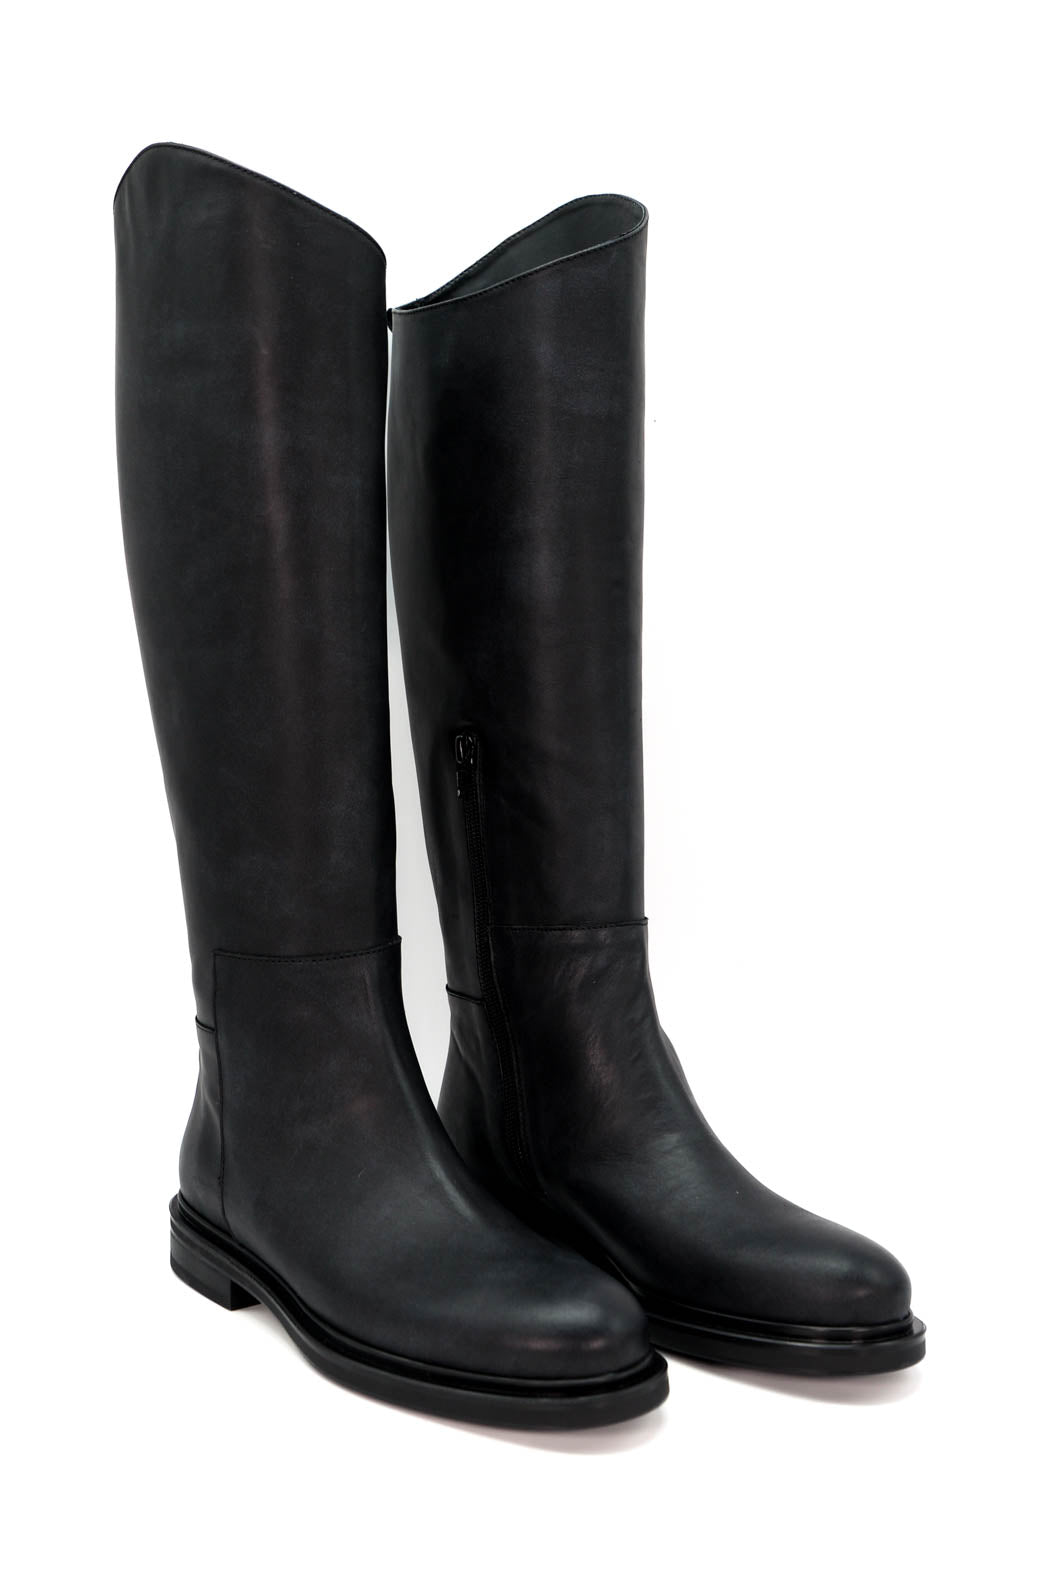 FMJ20 VINTAGE-EFFECT LEATHER TALL BOOTS